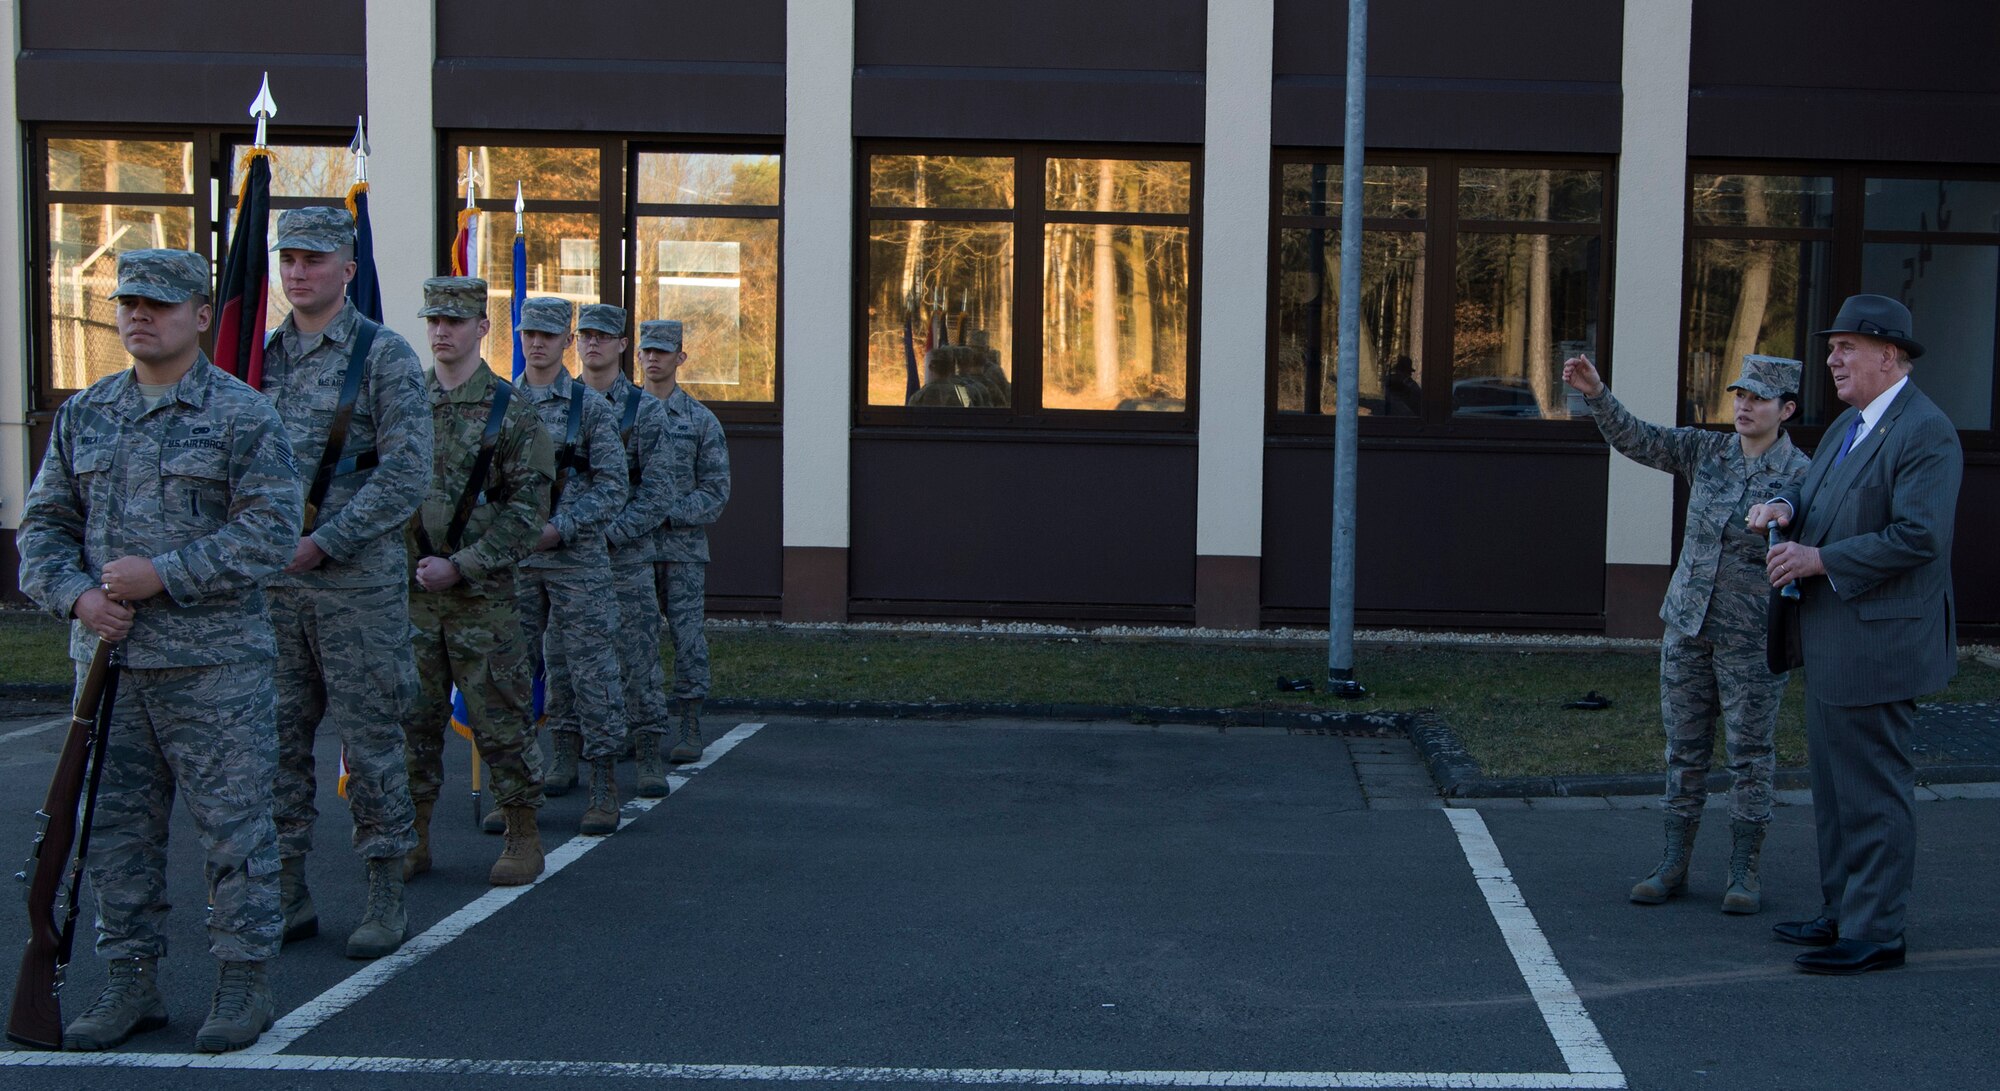 The honor guard performed a demonstration during Evans' visit to show what they do and their precision when performing